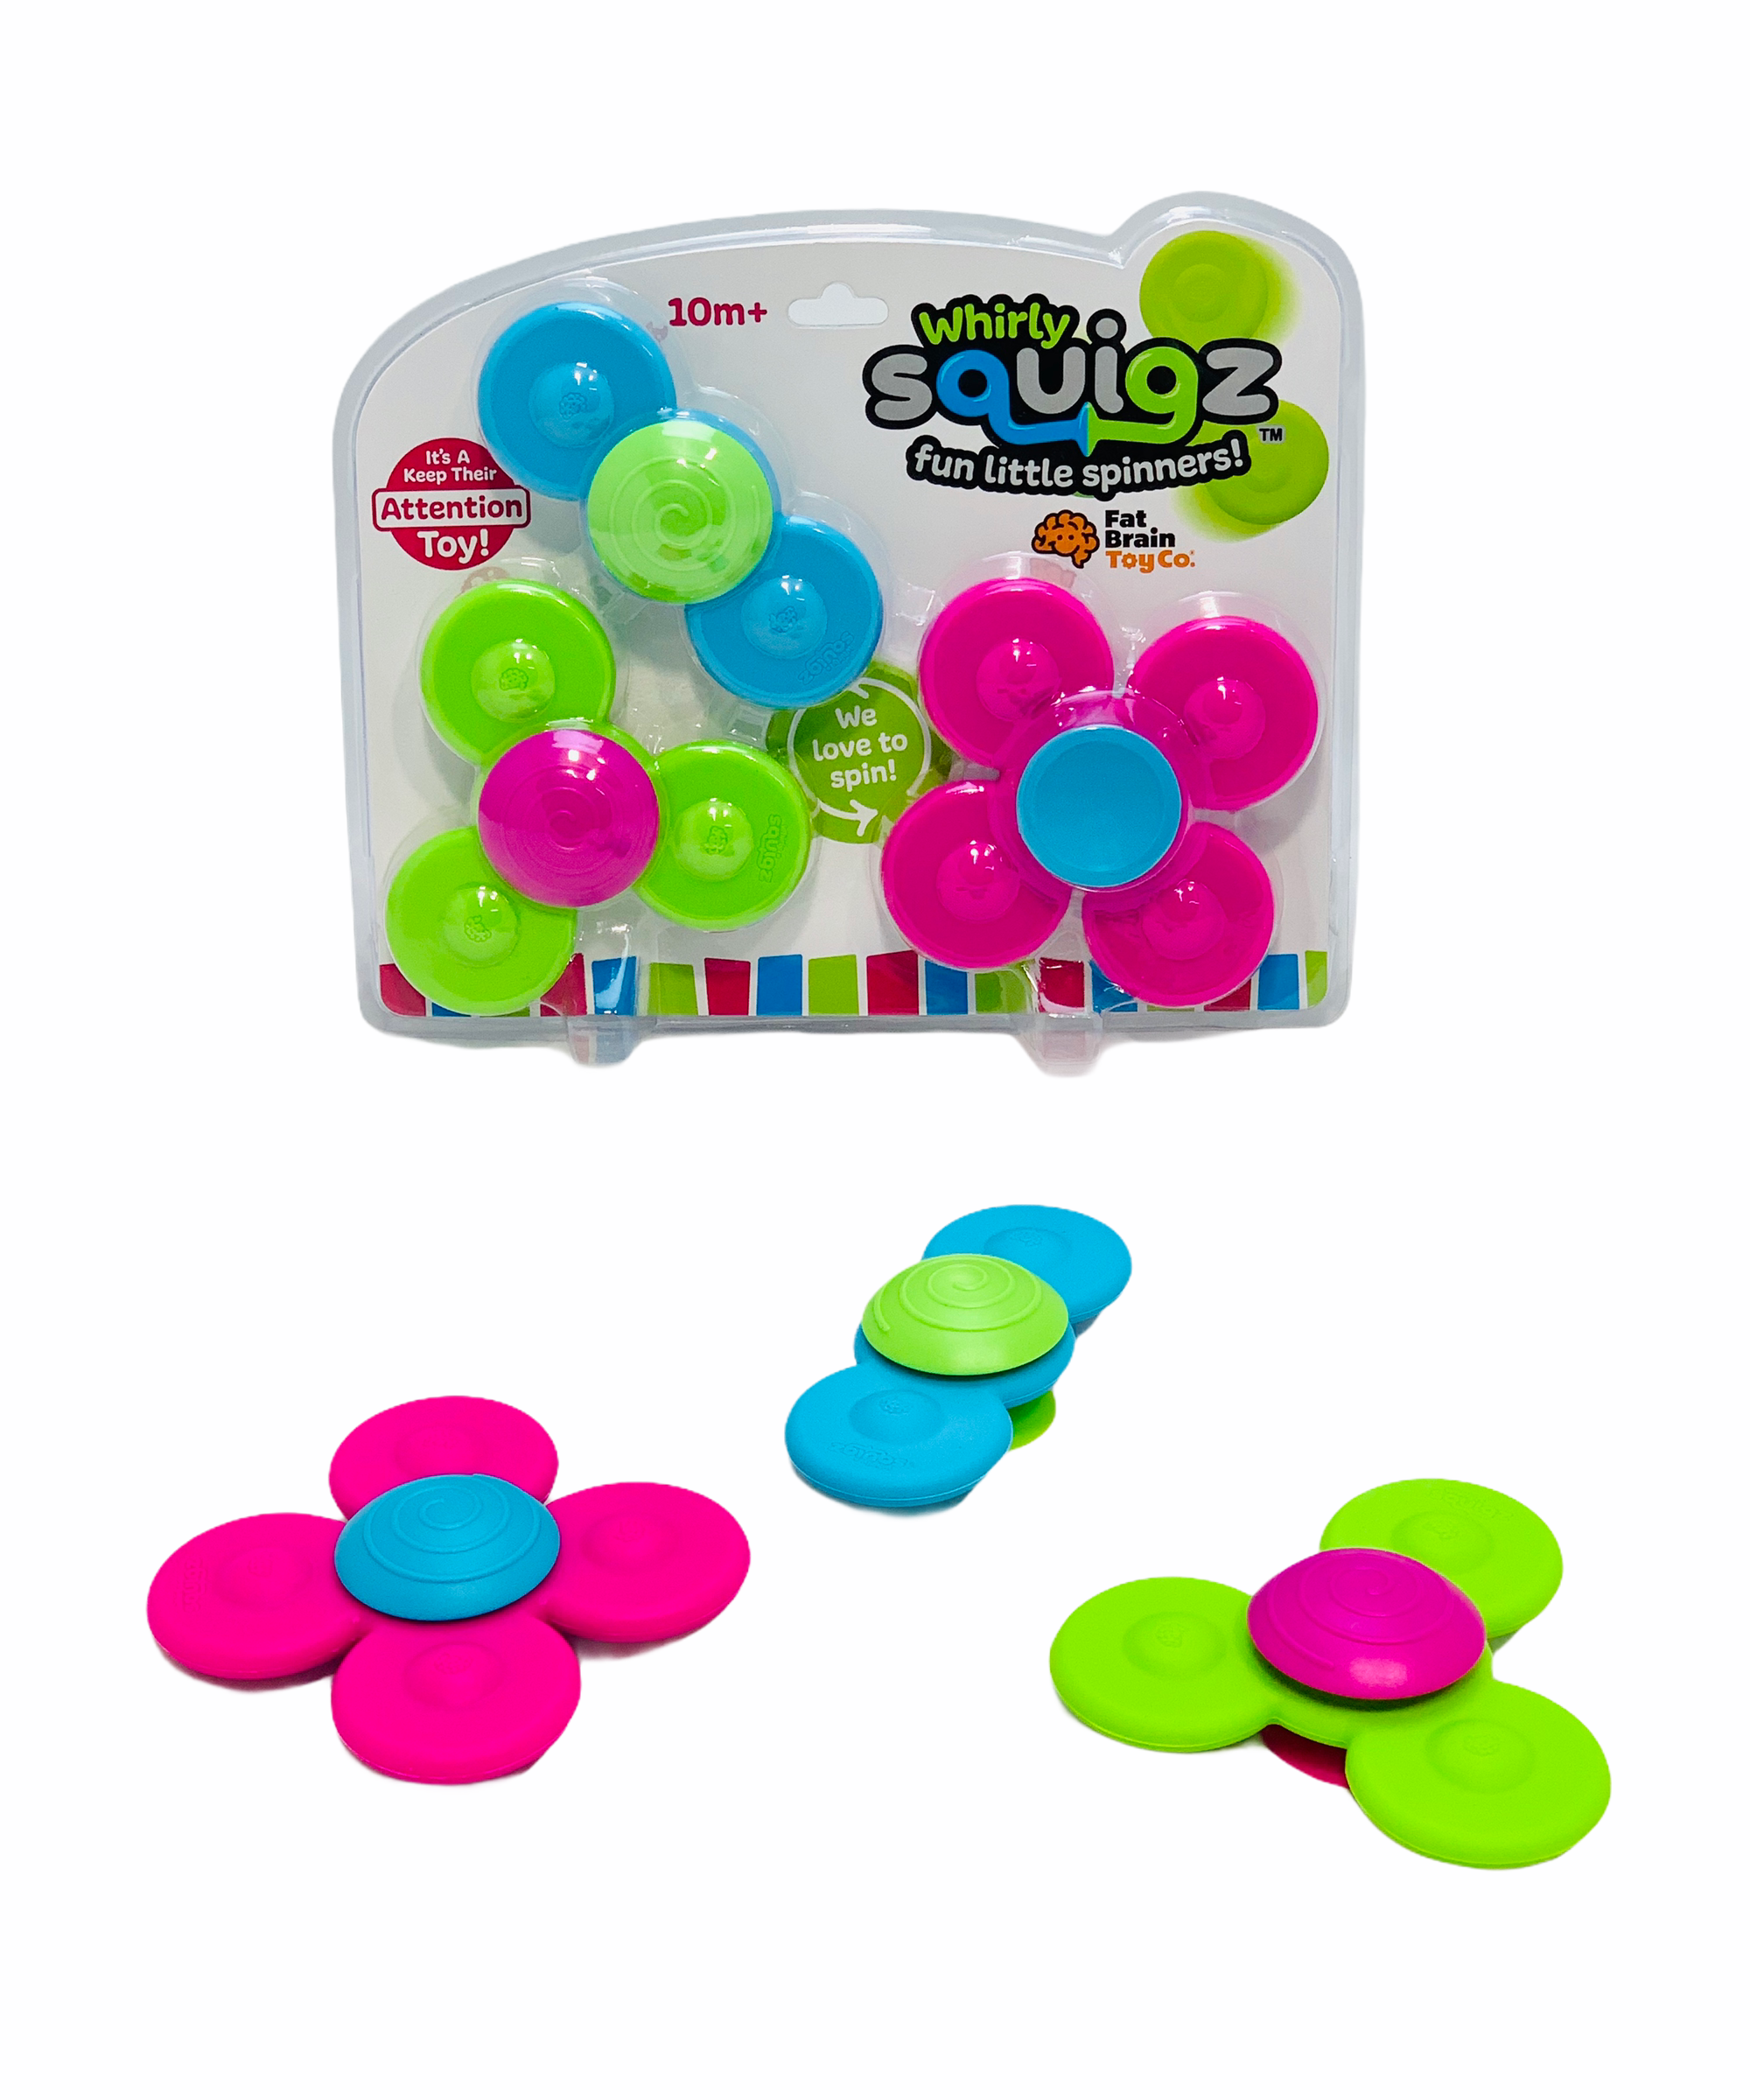 Fat Brain Whirly Squigz in pink, green and blue laid out in front of packet on white background